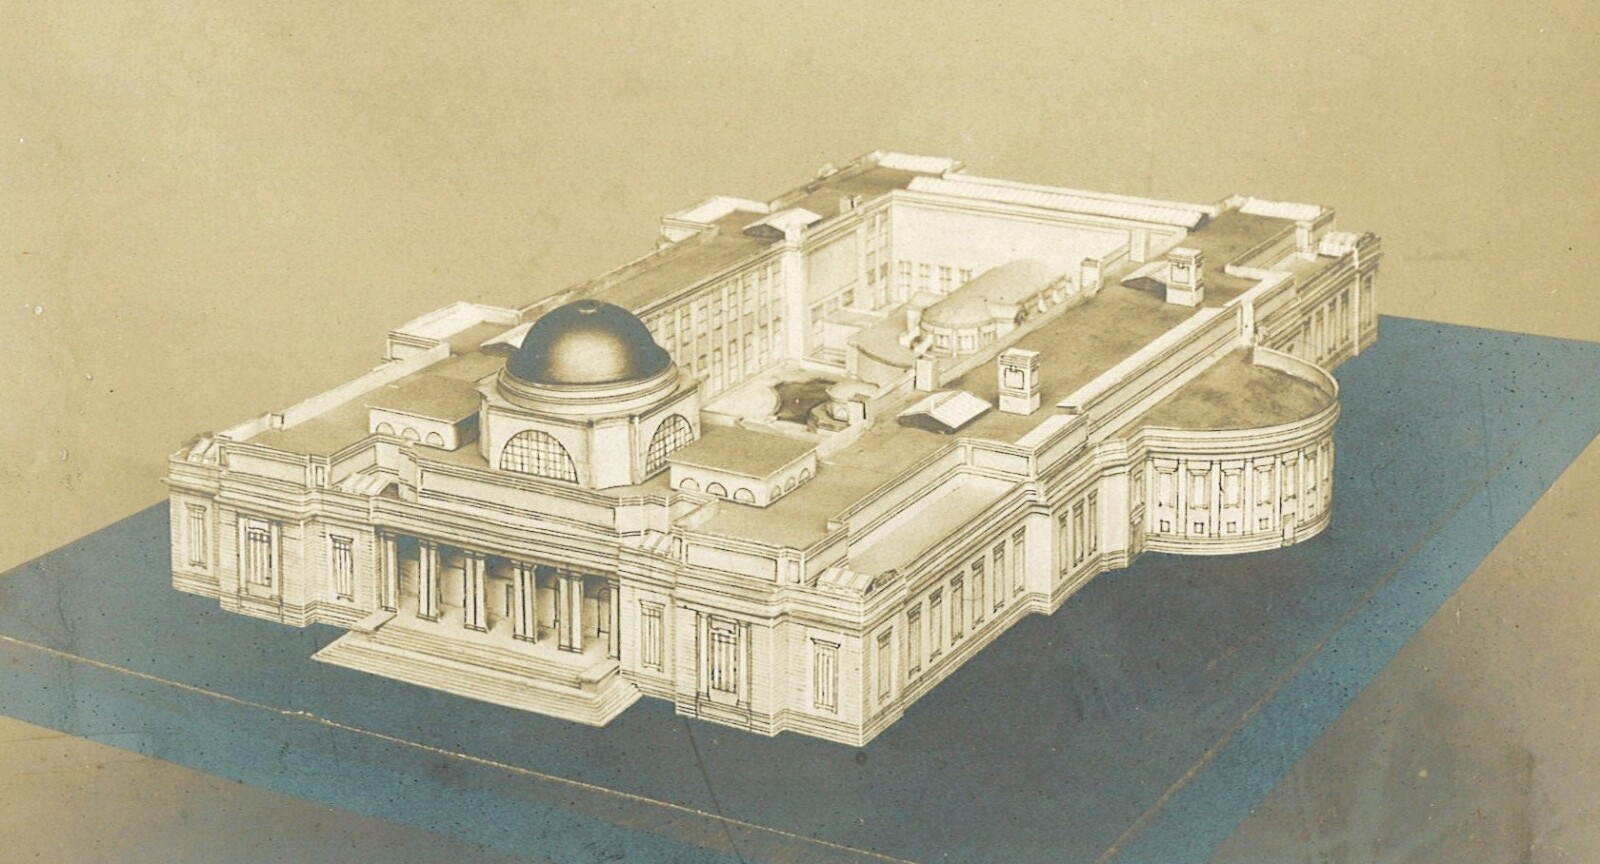 Architect's paper model of proposed design for National Museum Wales building in Cathays Park circa 1910